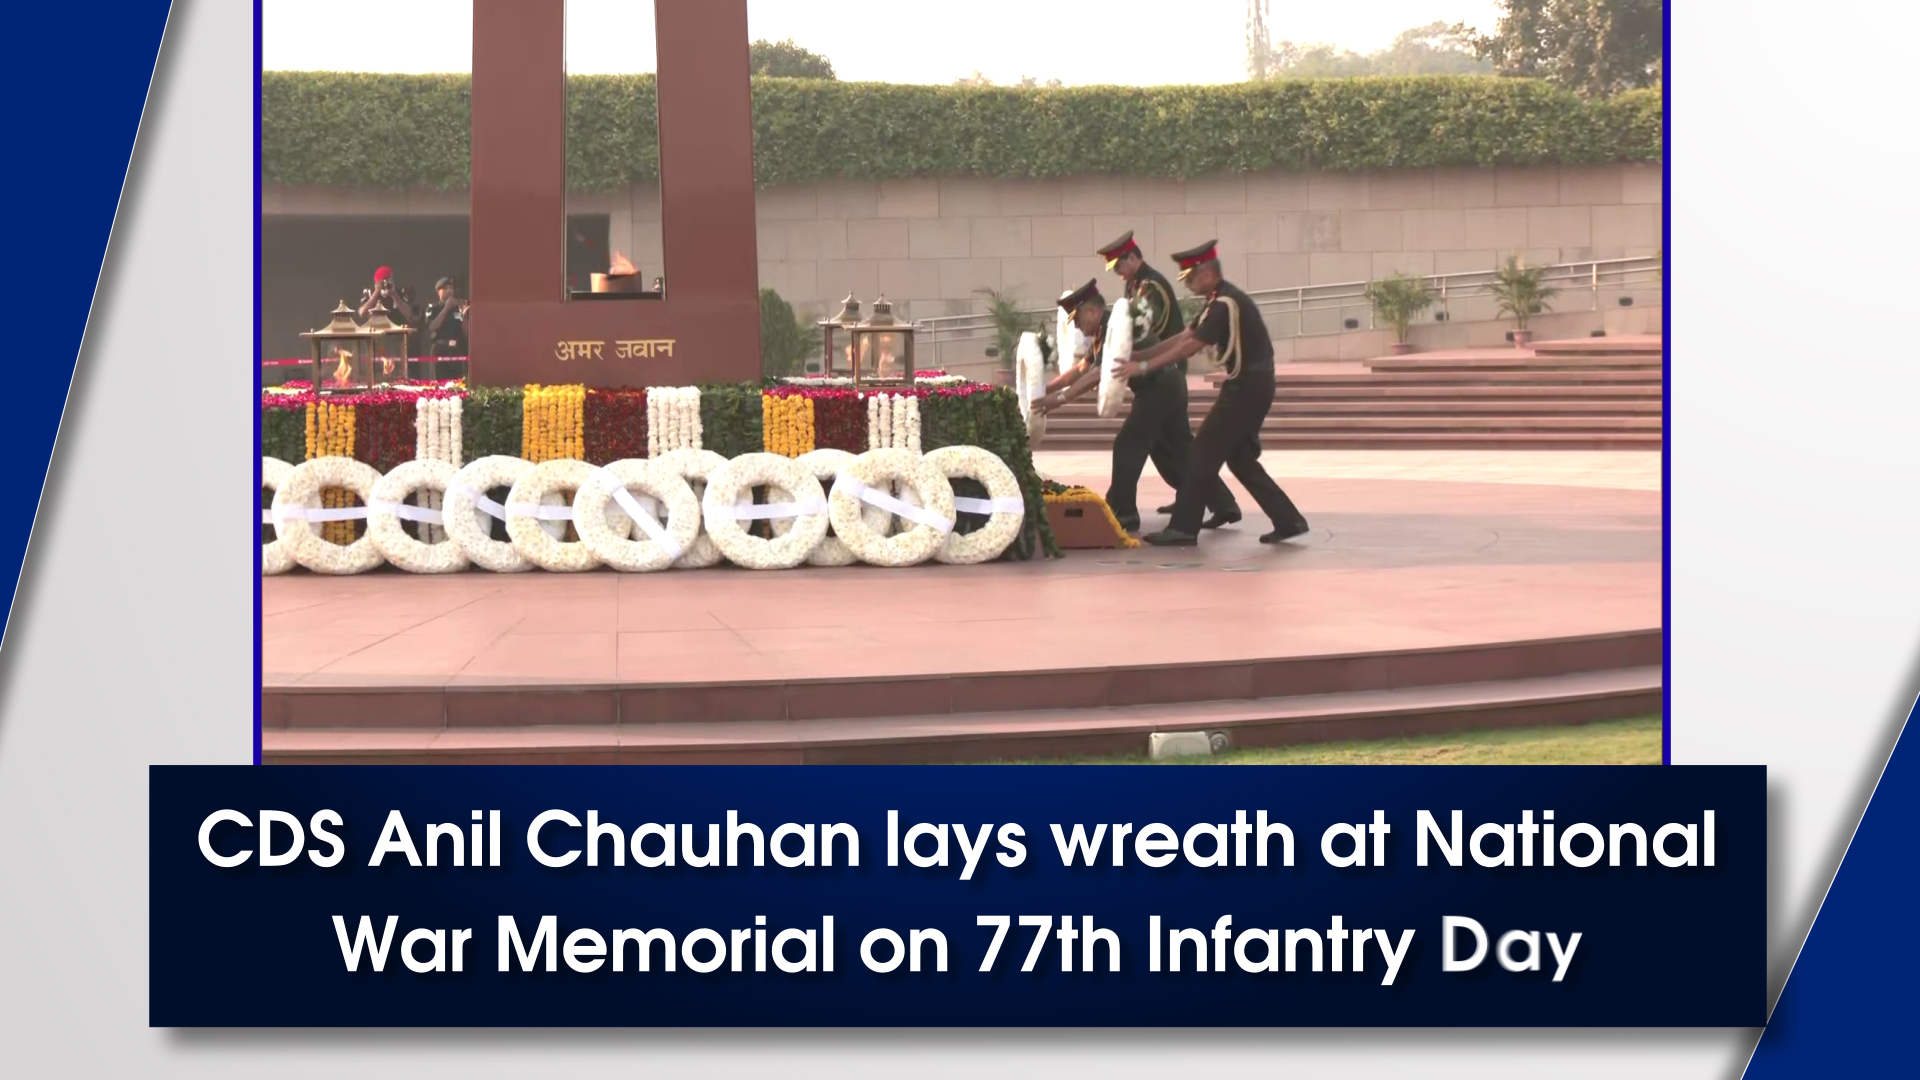 CDS Anil Chauhan lays wreath at National War Memorial on 77th Infantry Day